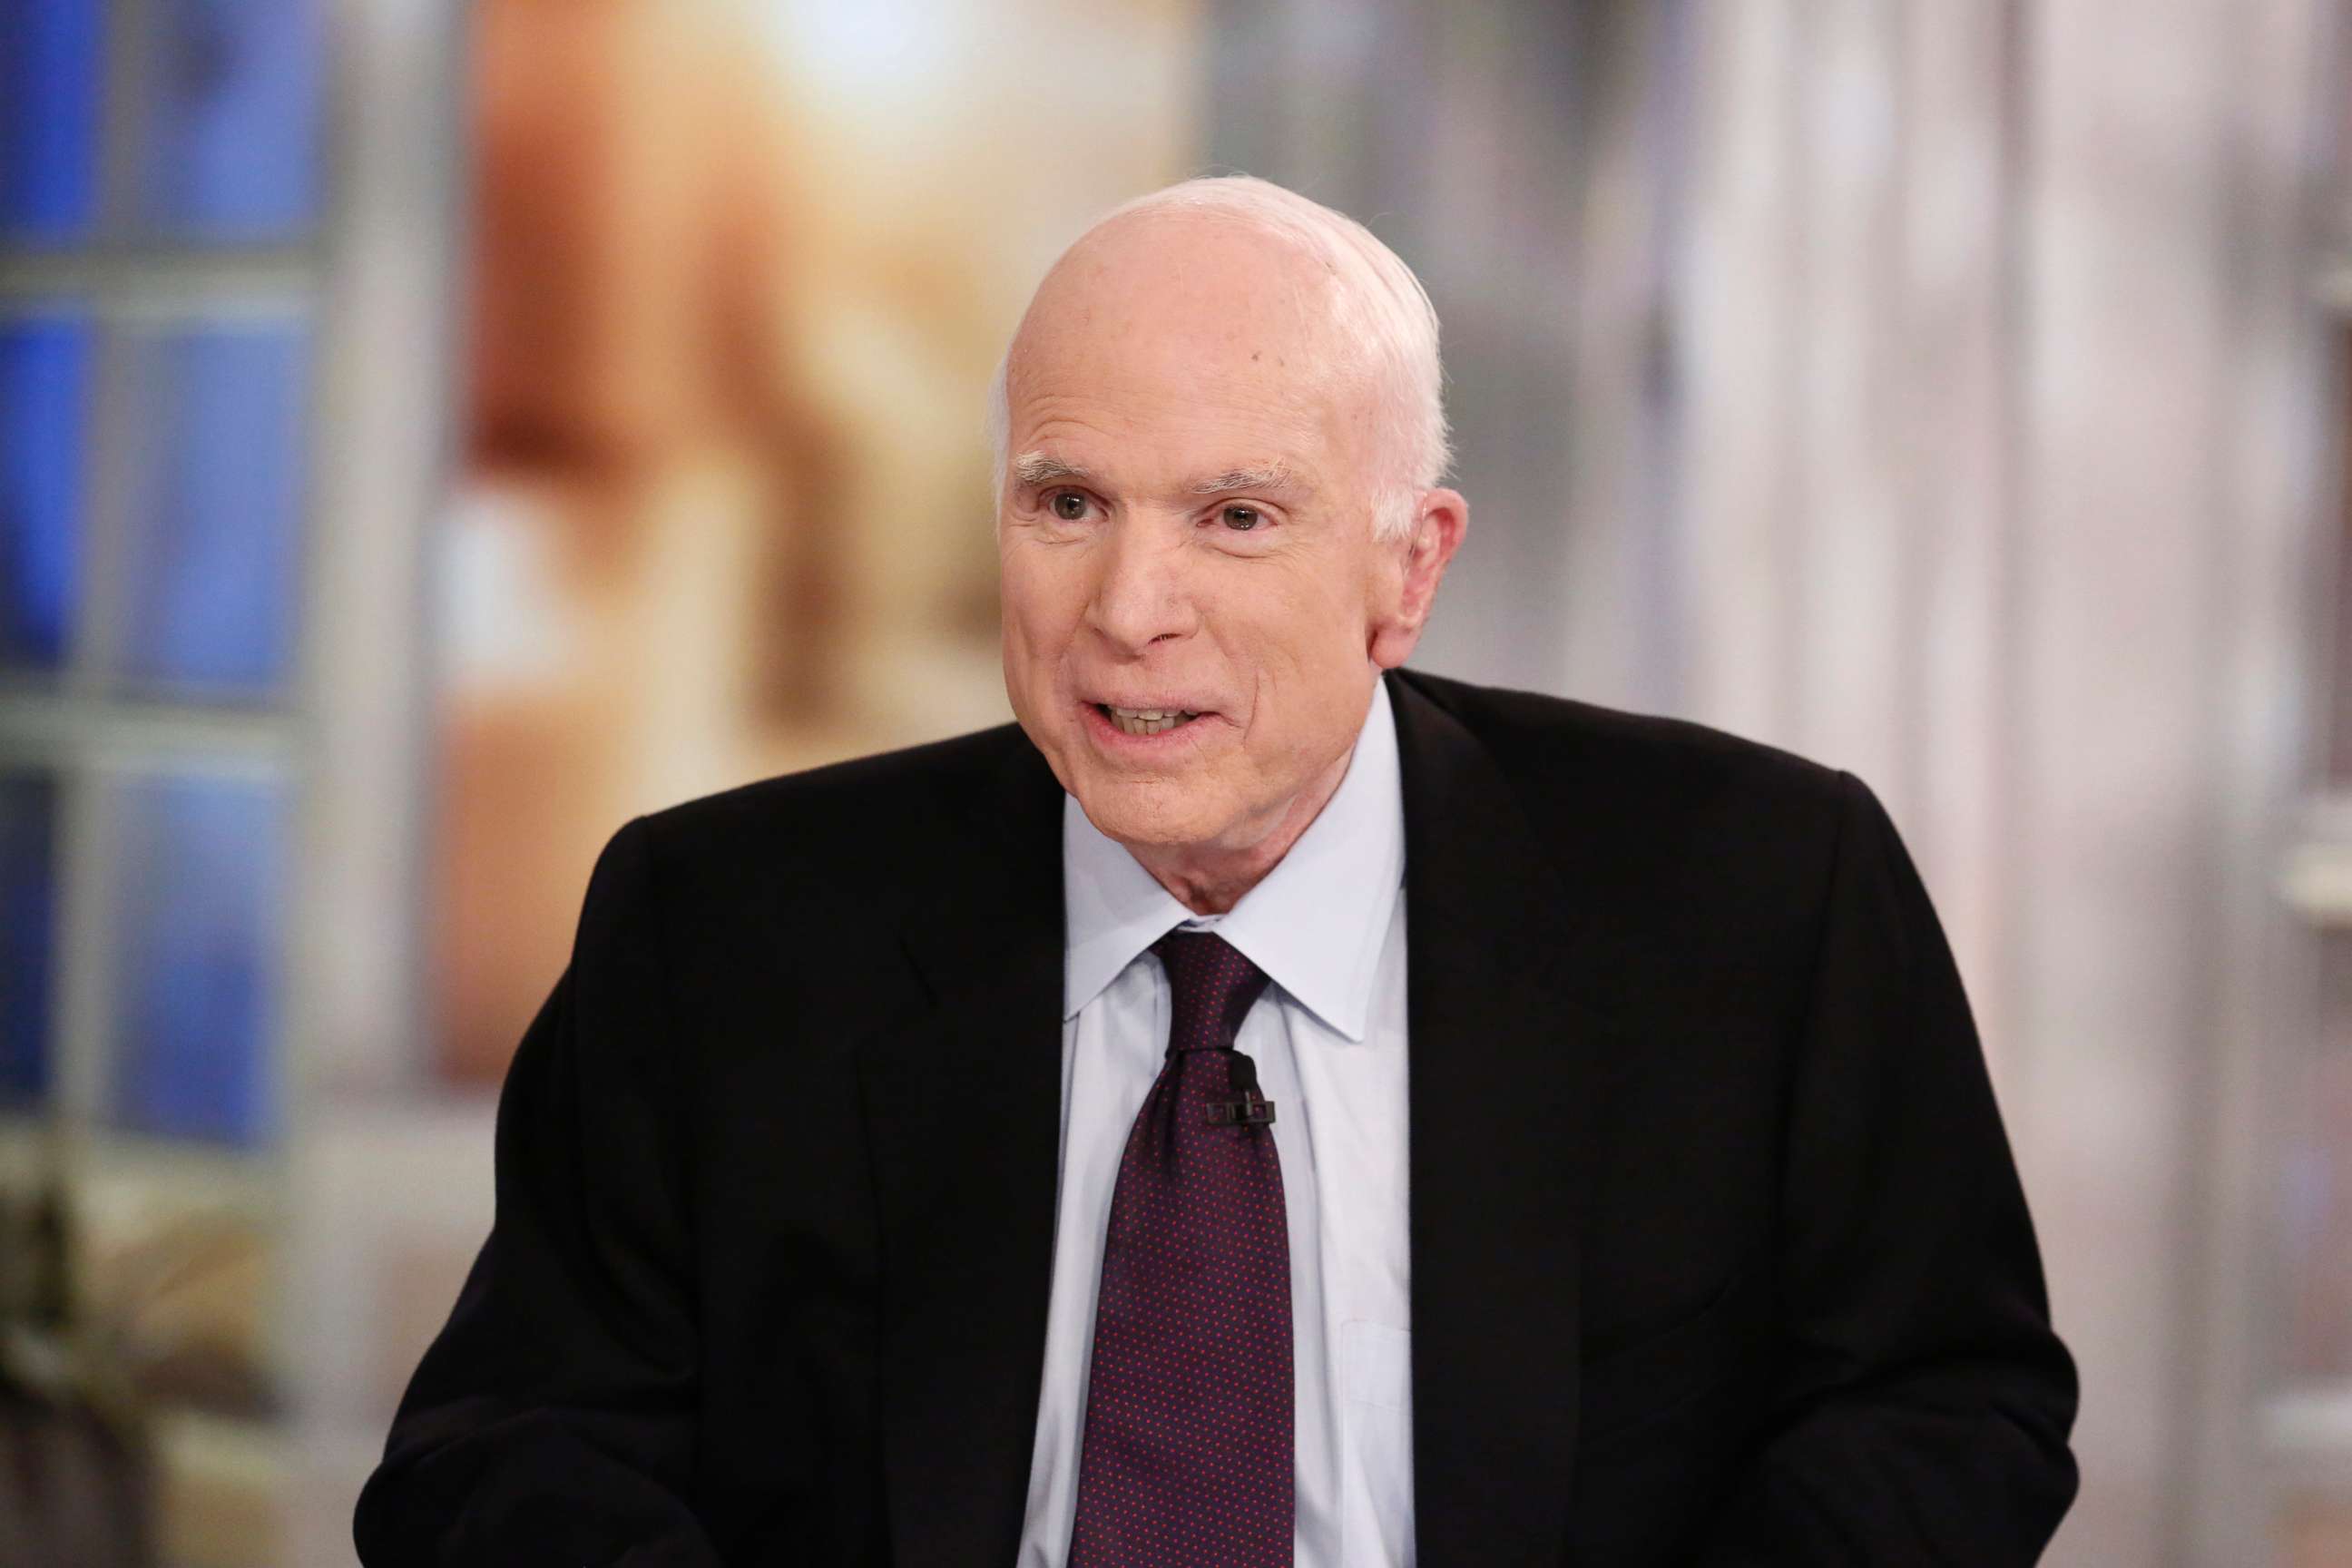 PHOTO: Sen. John McCain on "The View," which aired Oct. 23, 2017 on ABC Television Network.